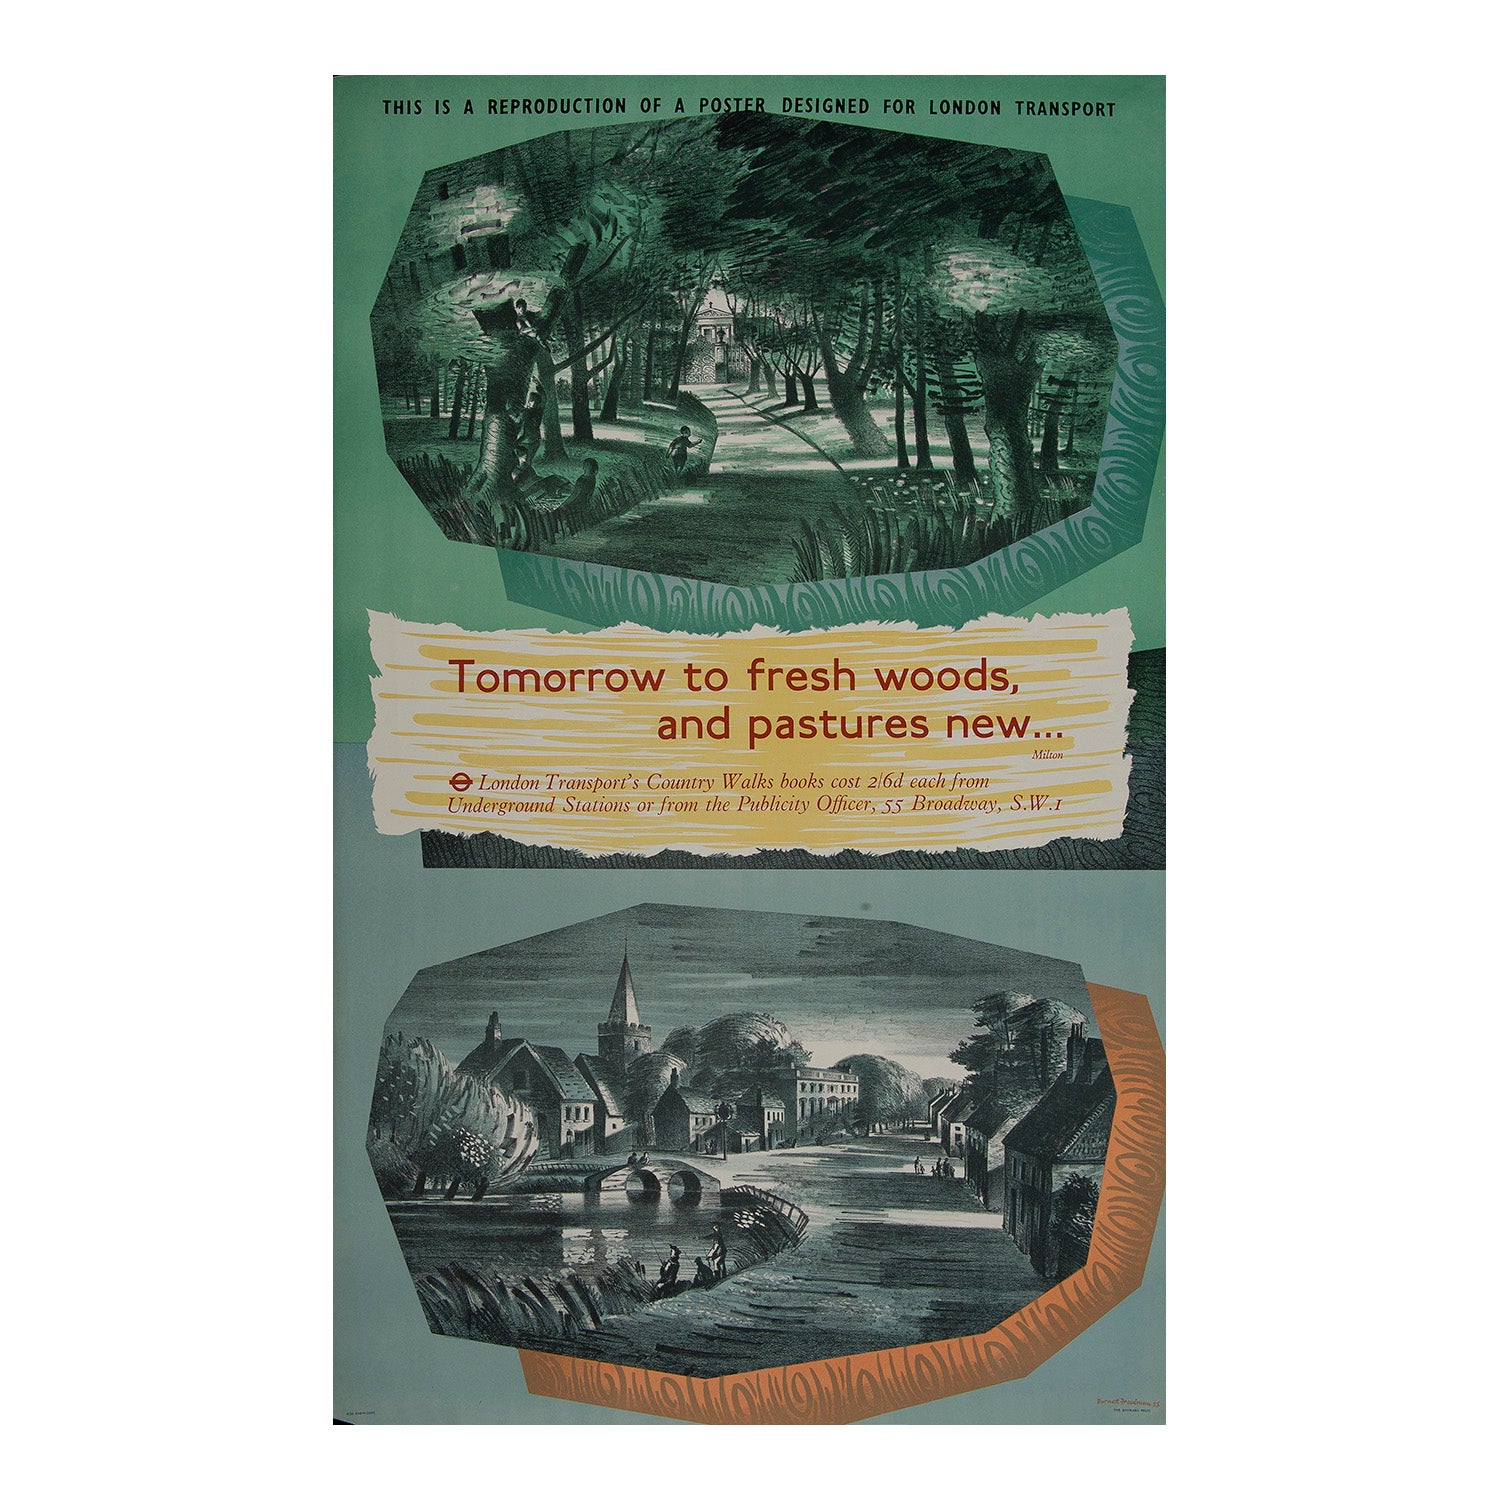 Original London Transport promotional poster for the company’s Country Walks guidebook, illustrated by Barnett Freedman, 1956. The poster features two scenic drawings of country walks, with the caption 'Tomorrow to fresh woods, and pastures new'.